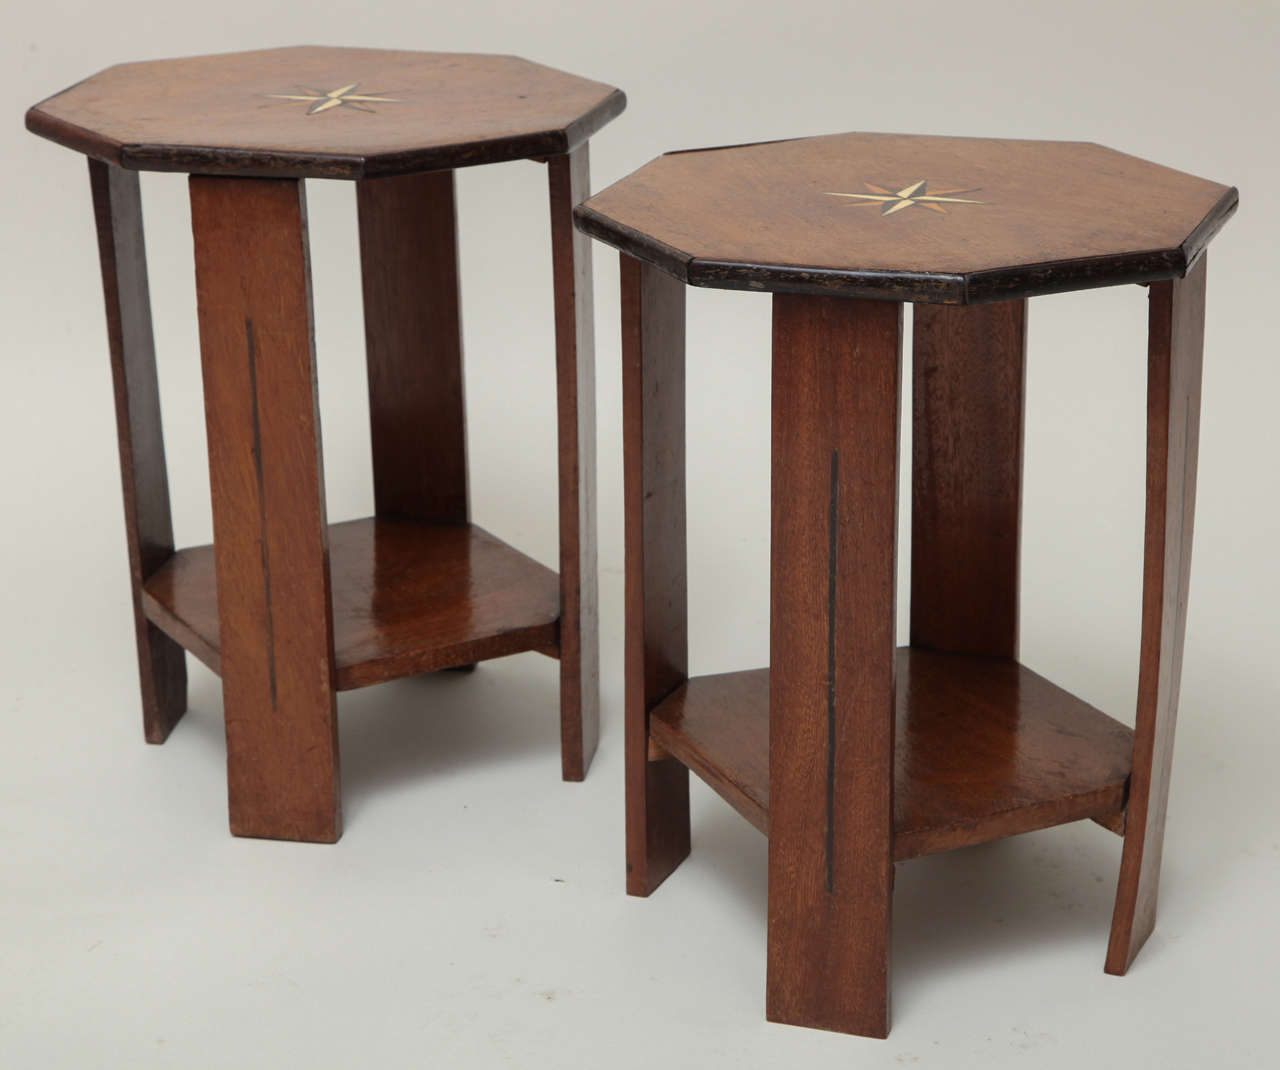 Pair of 1920s Indian octagonal side tables having ebony banding, bone, sandalwood and ebony compass star inlaid tops, the four legs with ebony stripe inlay, the legs joined by shaped shelf.